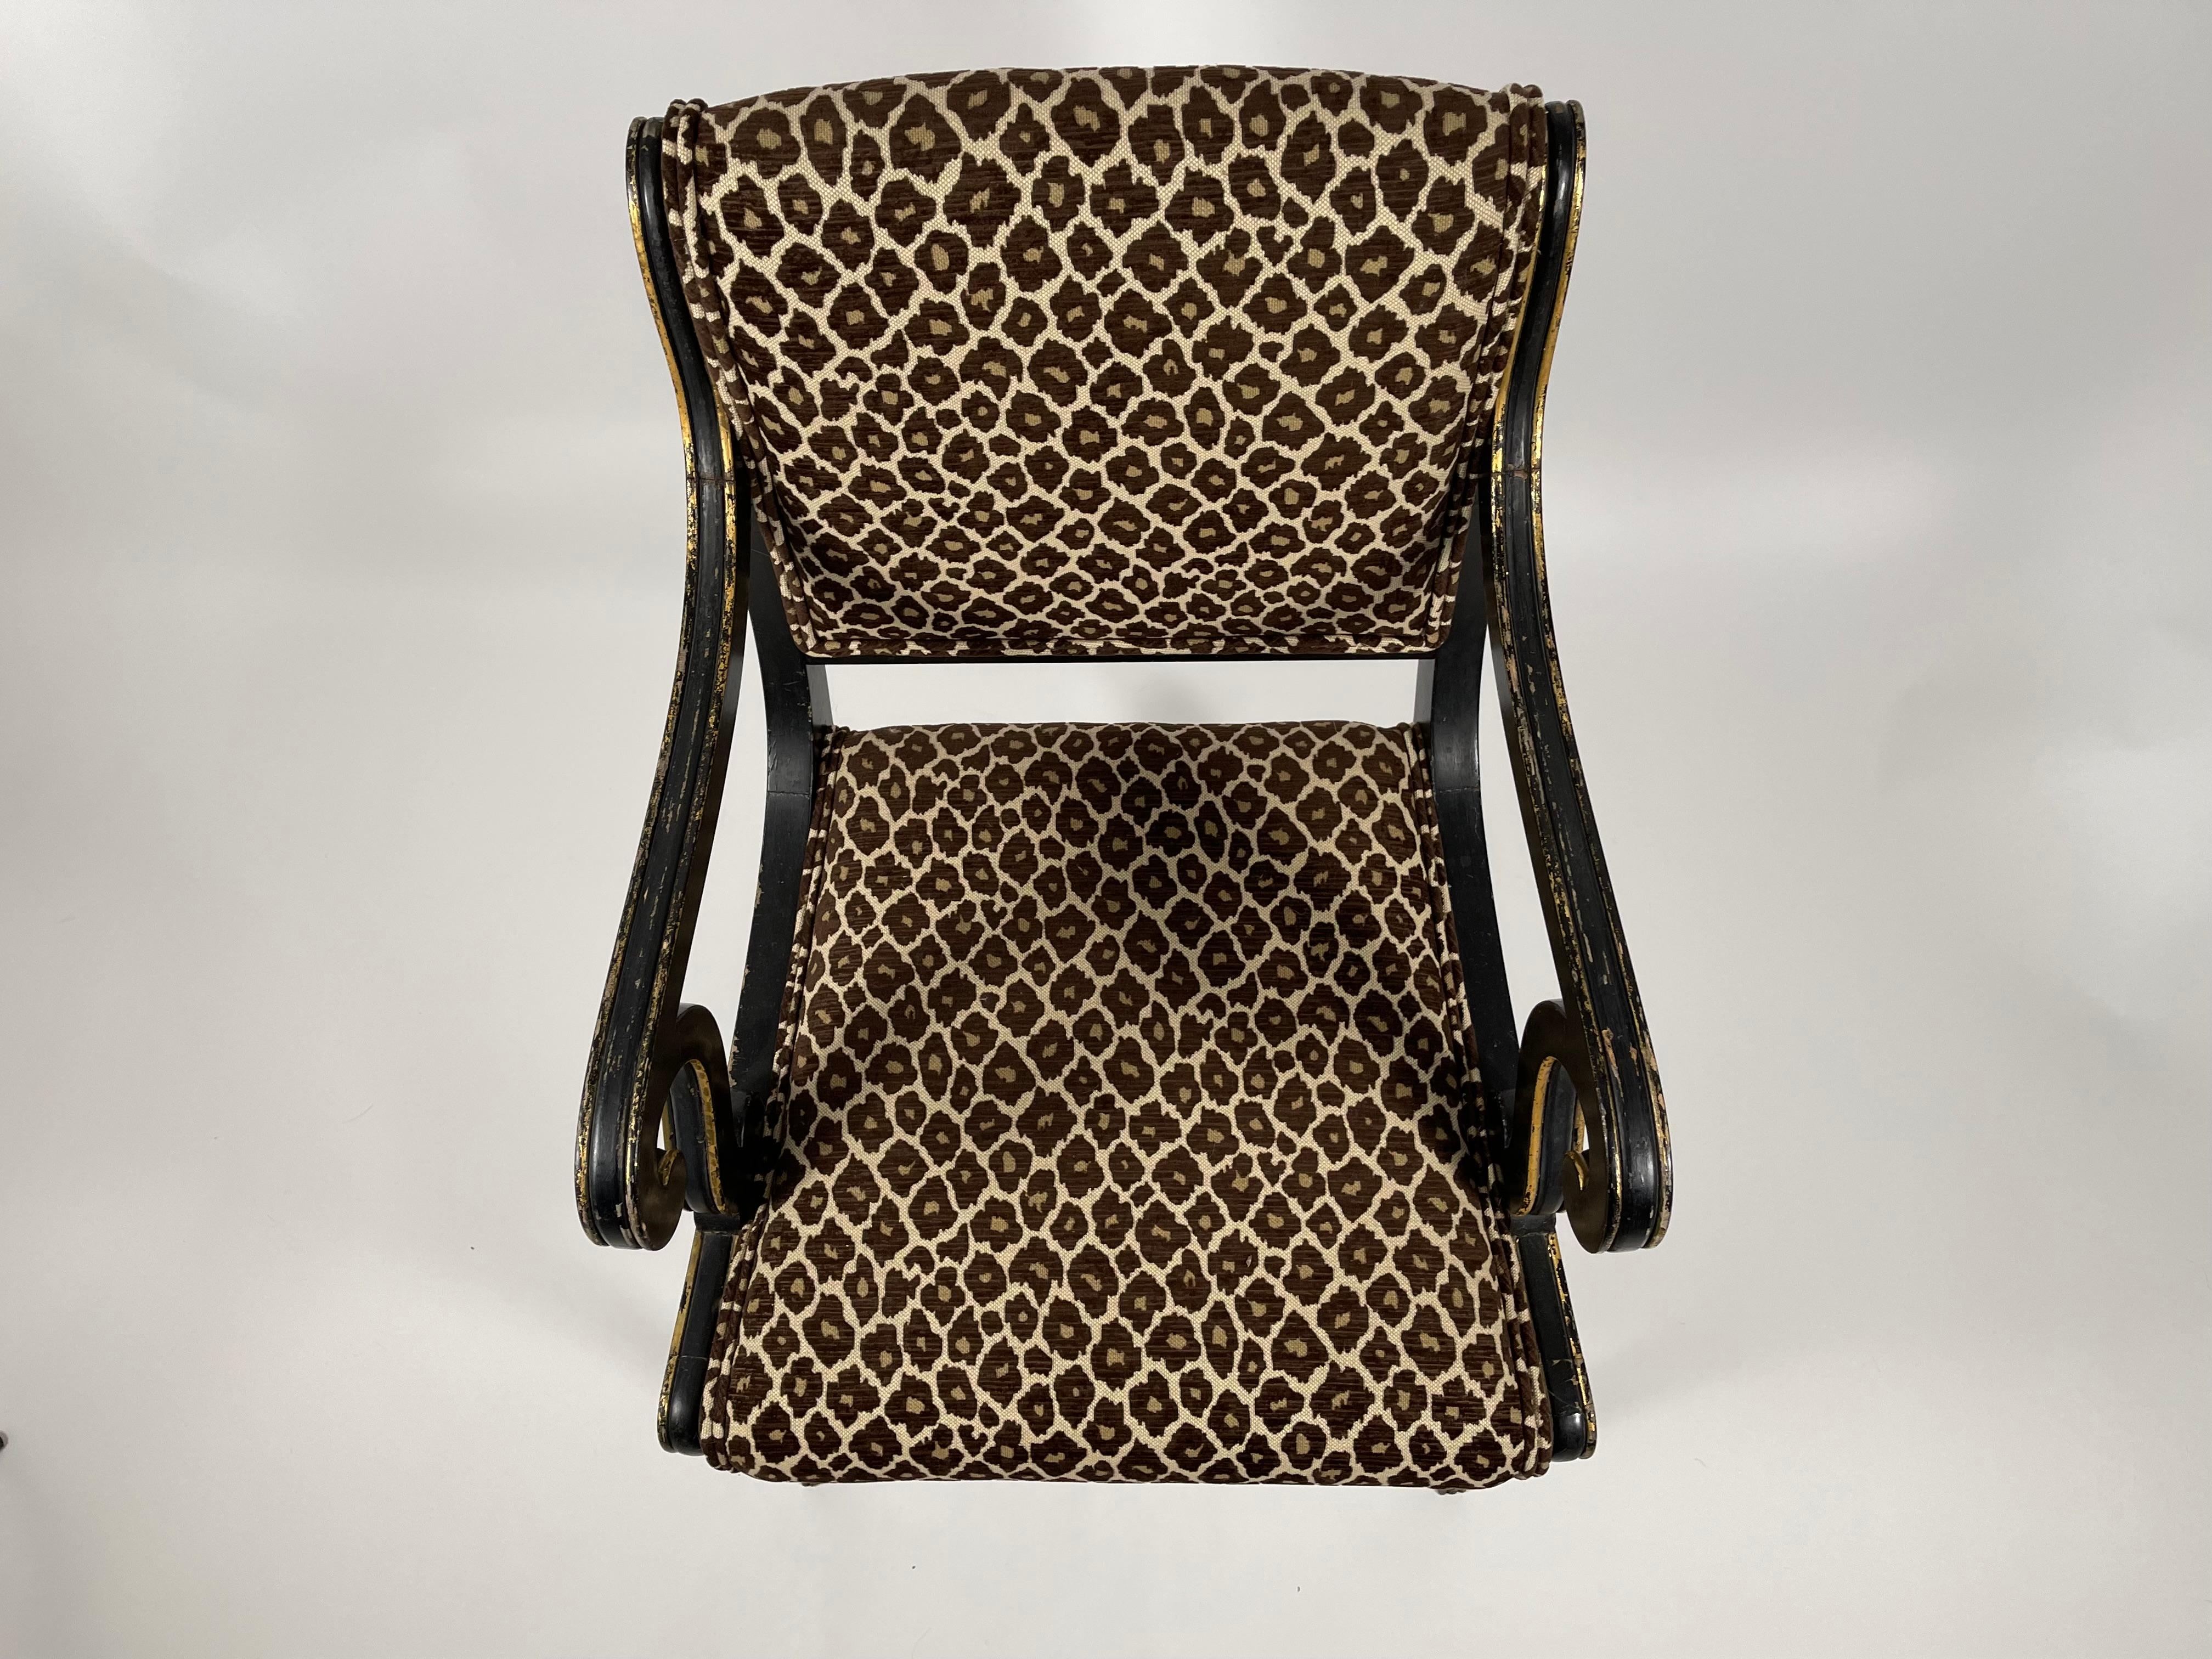 Early 20th Century Regency Style Neoclassical Ebonized and Parcel Gilt Upholstered Arm Chair